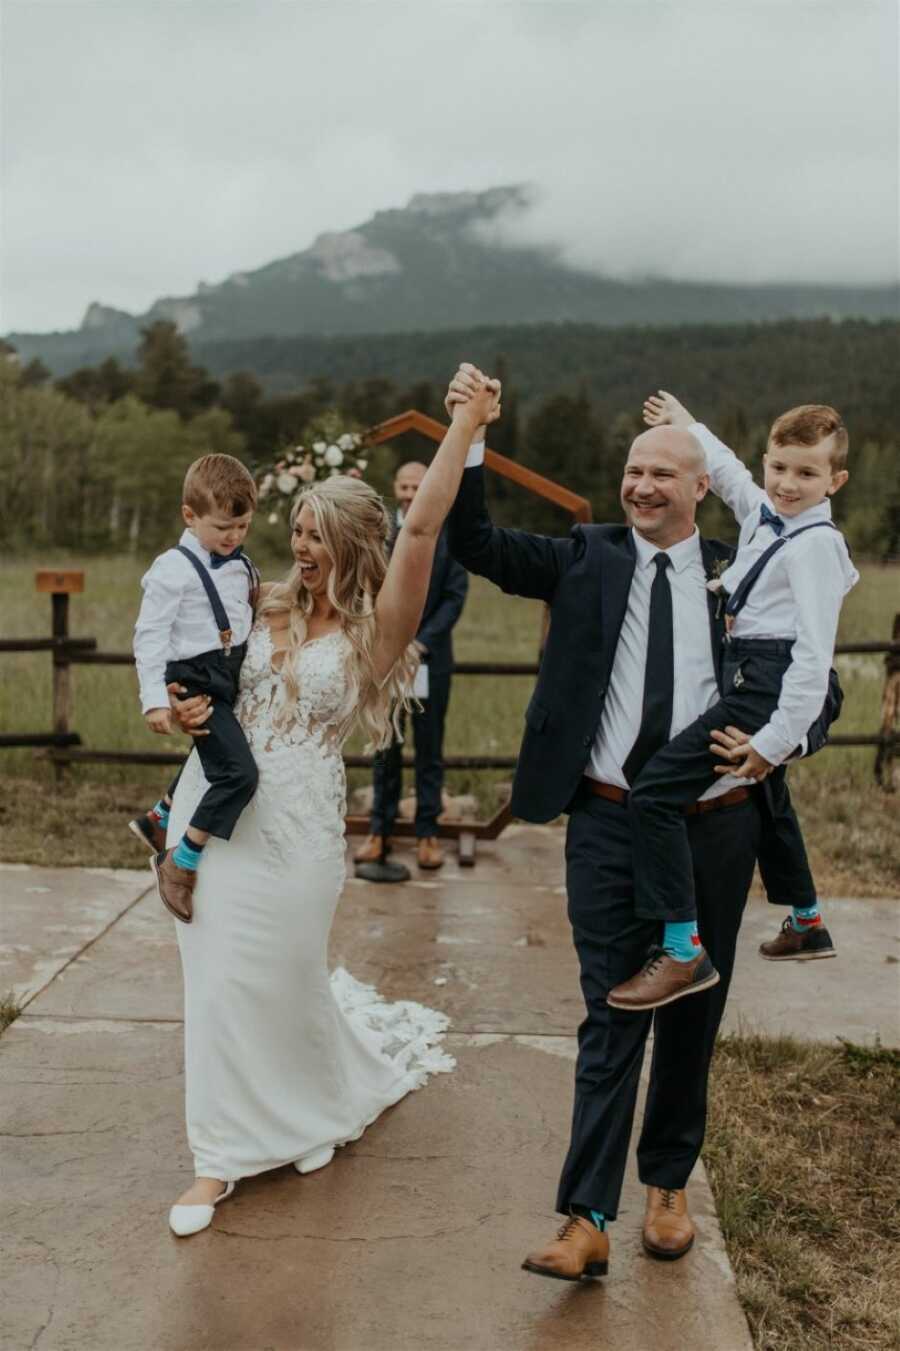 Newlyweds cheer while walking down the aisle as an official married couple with their two sons